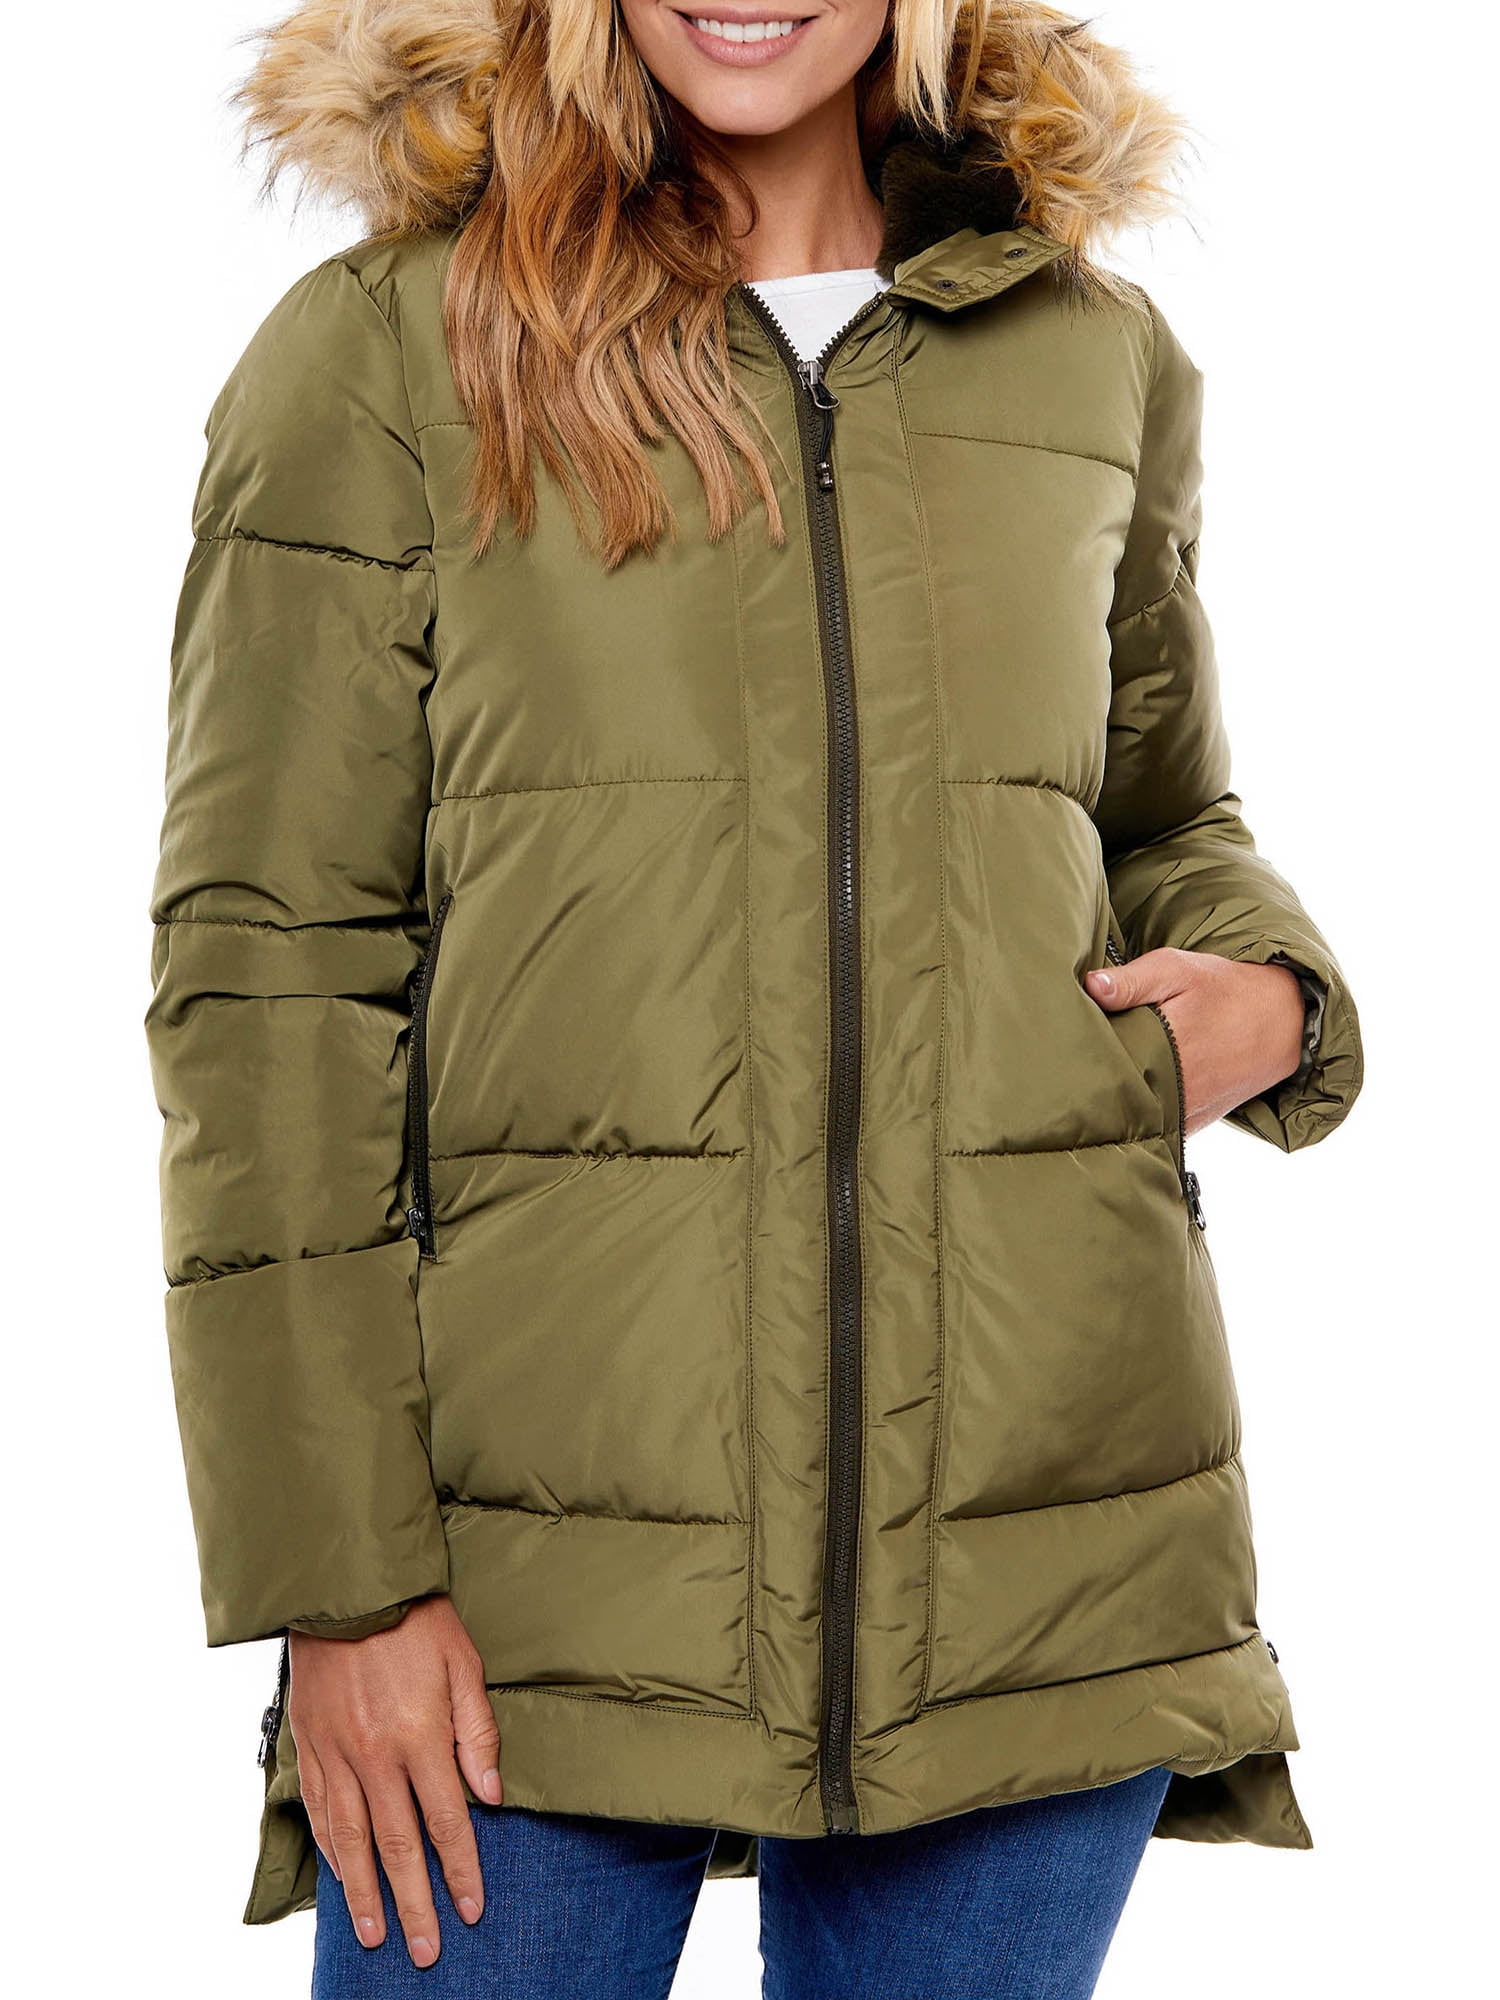 Be Boundless Women's Faux Fur Lined Hooded Parka Coat